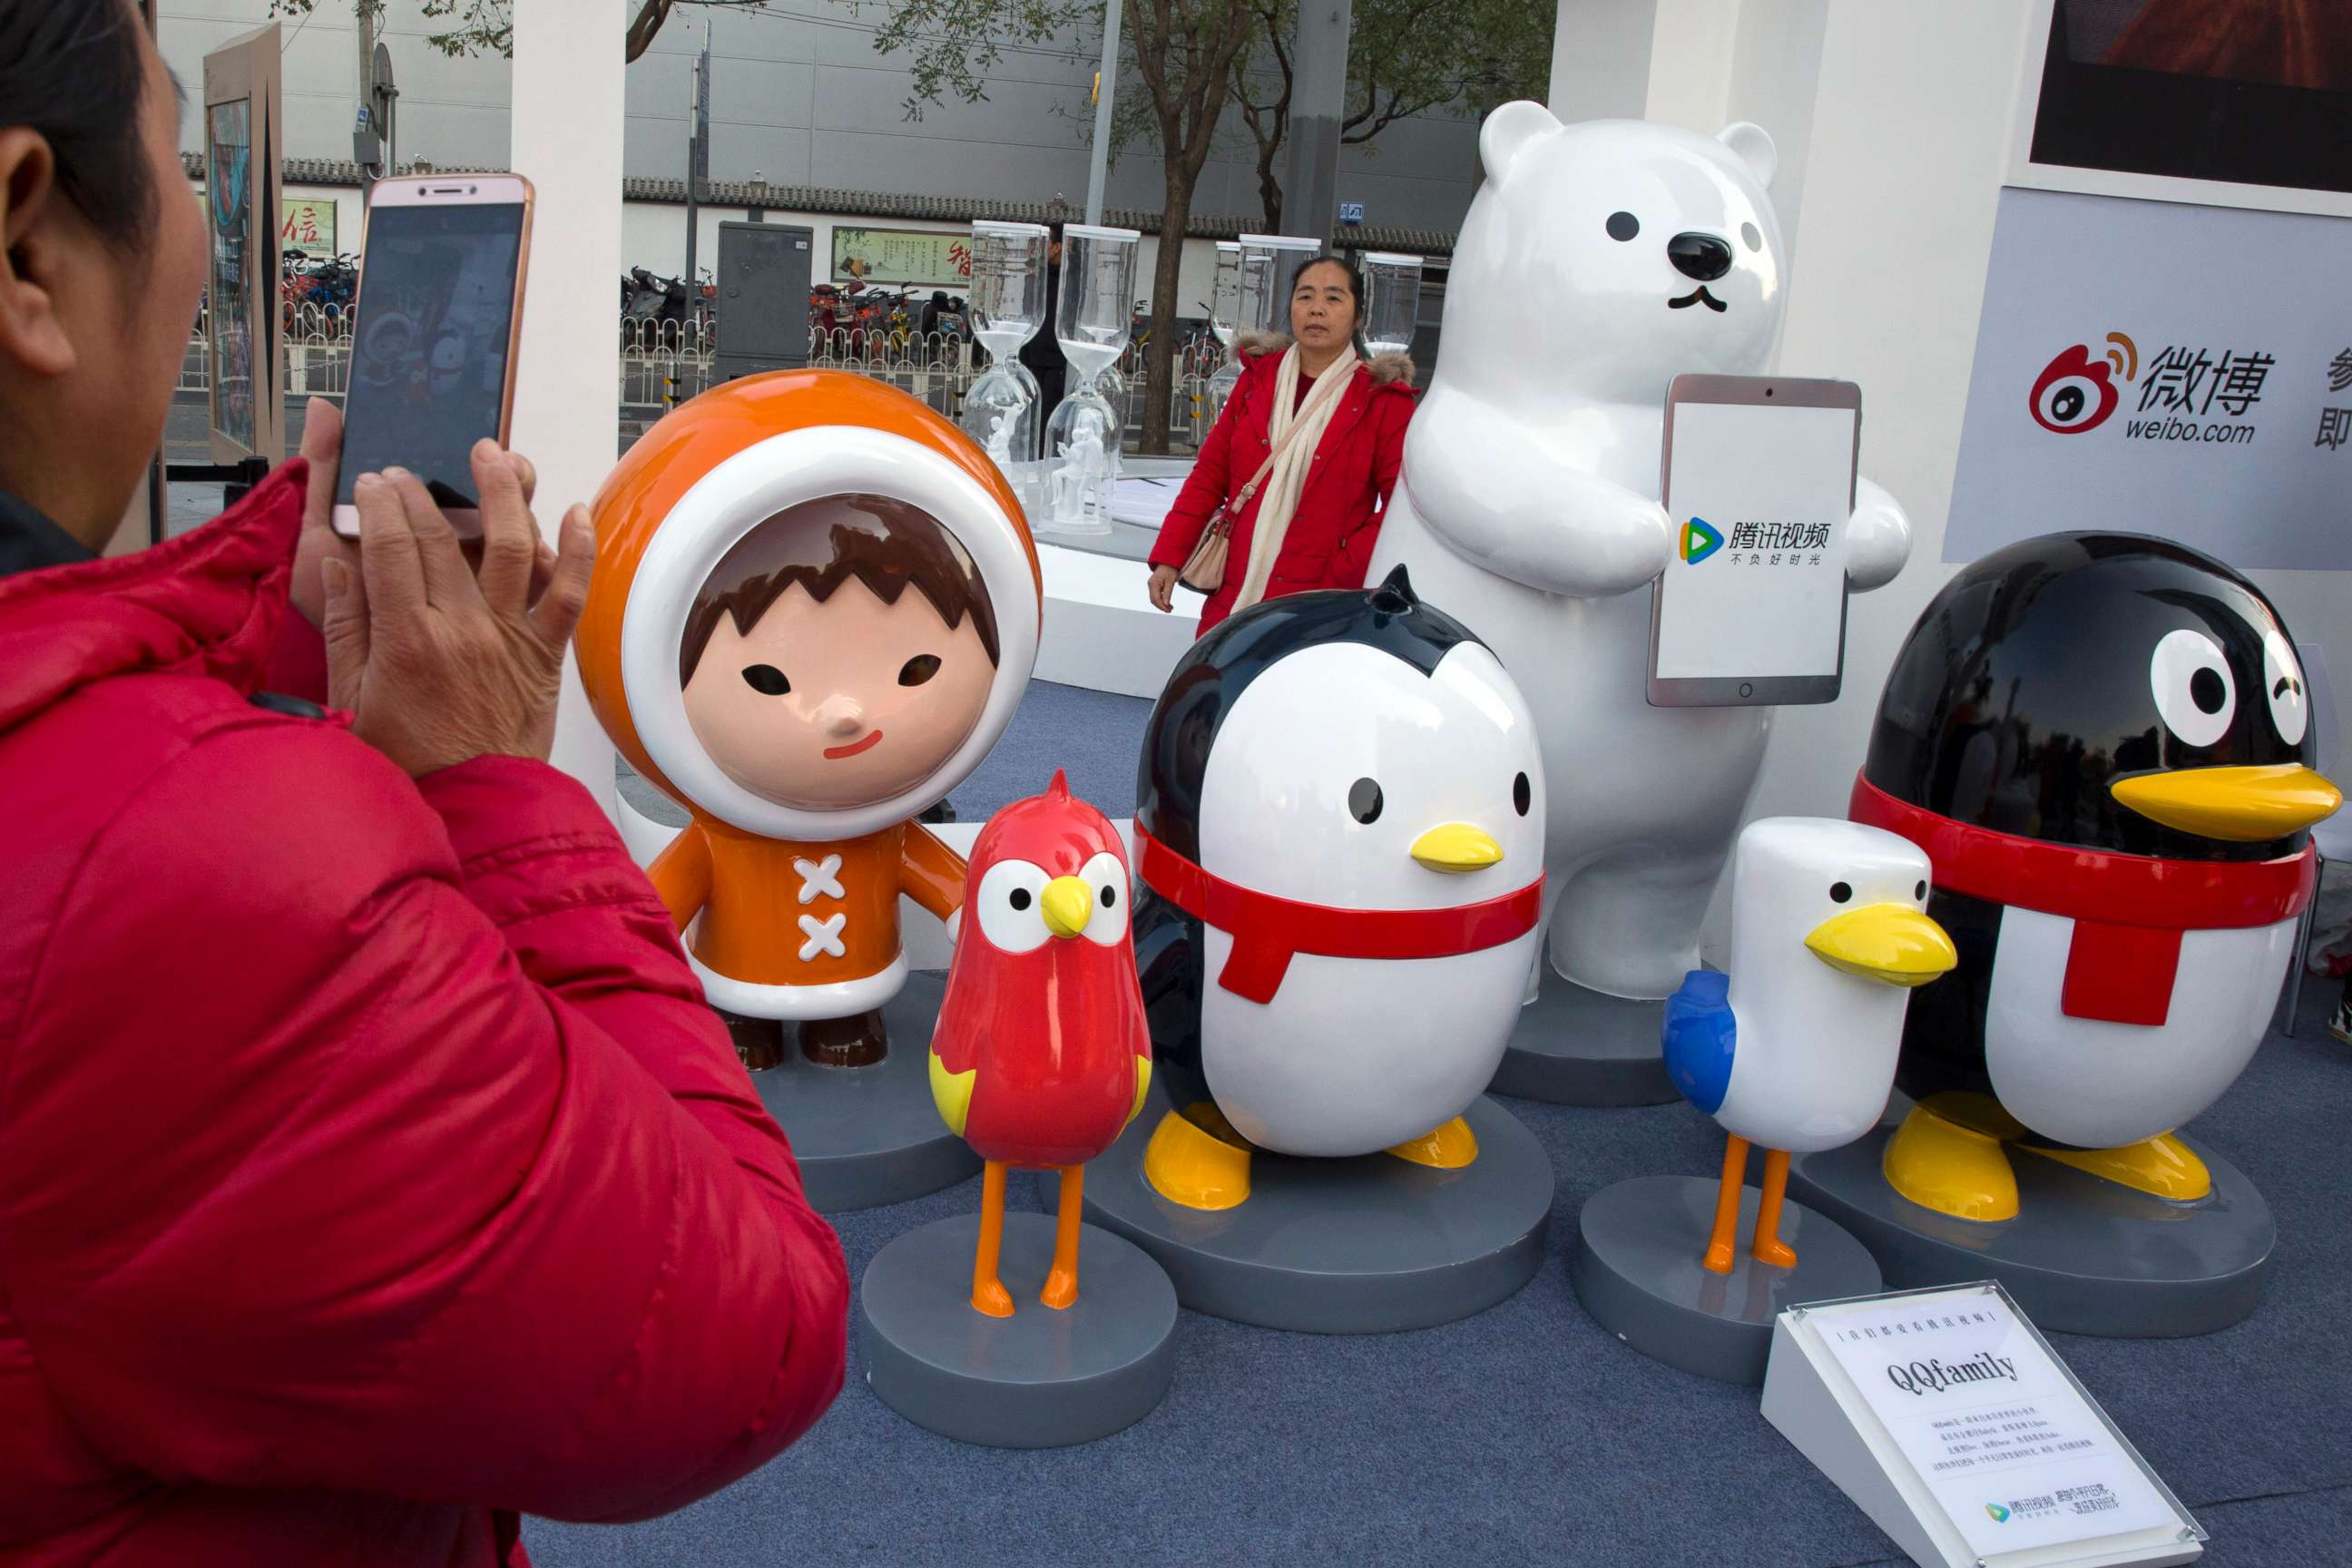 PHOTO: A woman takes photos near mascots for various social media platforms owned by Chinese internet conglomerate Tencent Holdings Limited during a promotion of Tencent Video, a video streaming service, in Beijing, Nov. 20, 2017.